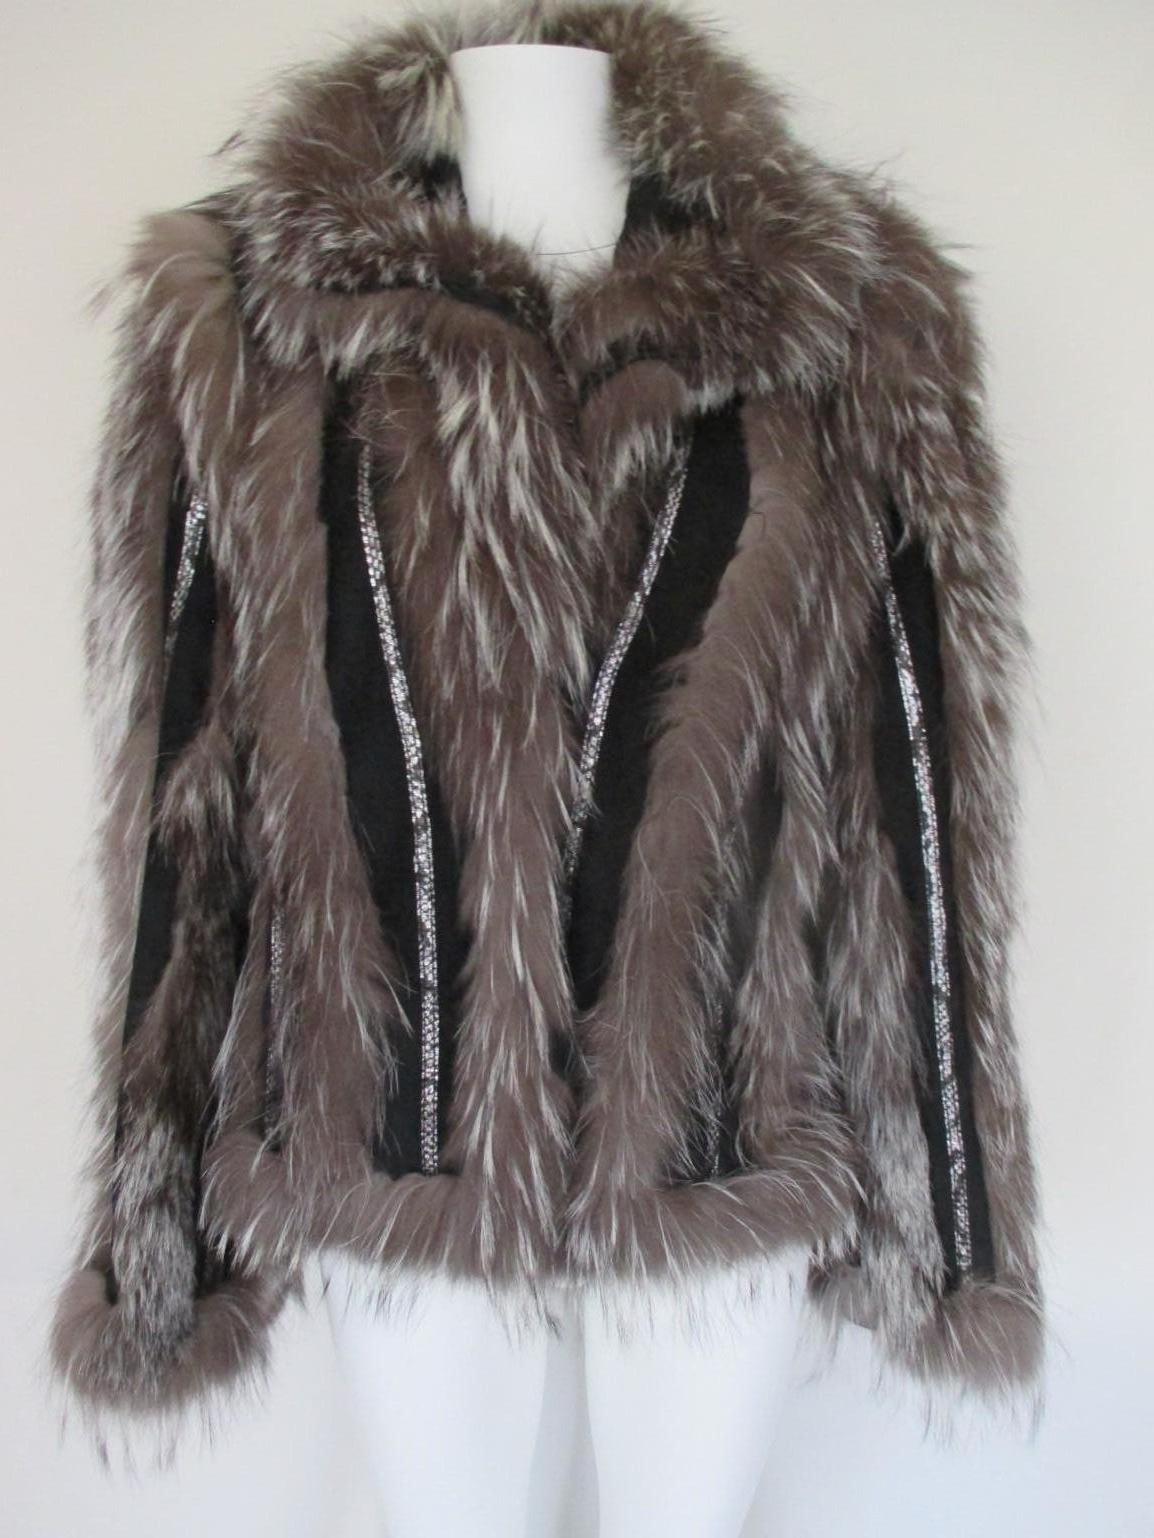 This vintage jacket has 2 pockets, 3 leather buttons closure.

Wev offer more exclusive fur items, view our frontstore

The material of the jacket is black leather suede, snake details, silver fox fur and is light to wear.
It has a nice embroidered